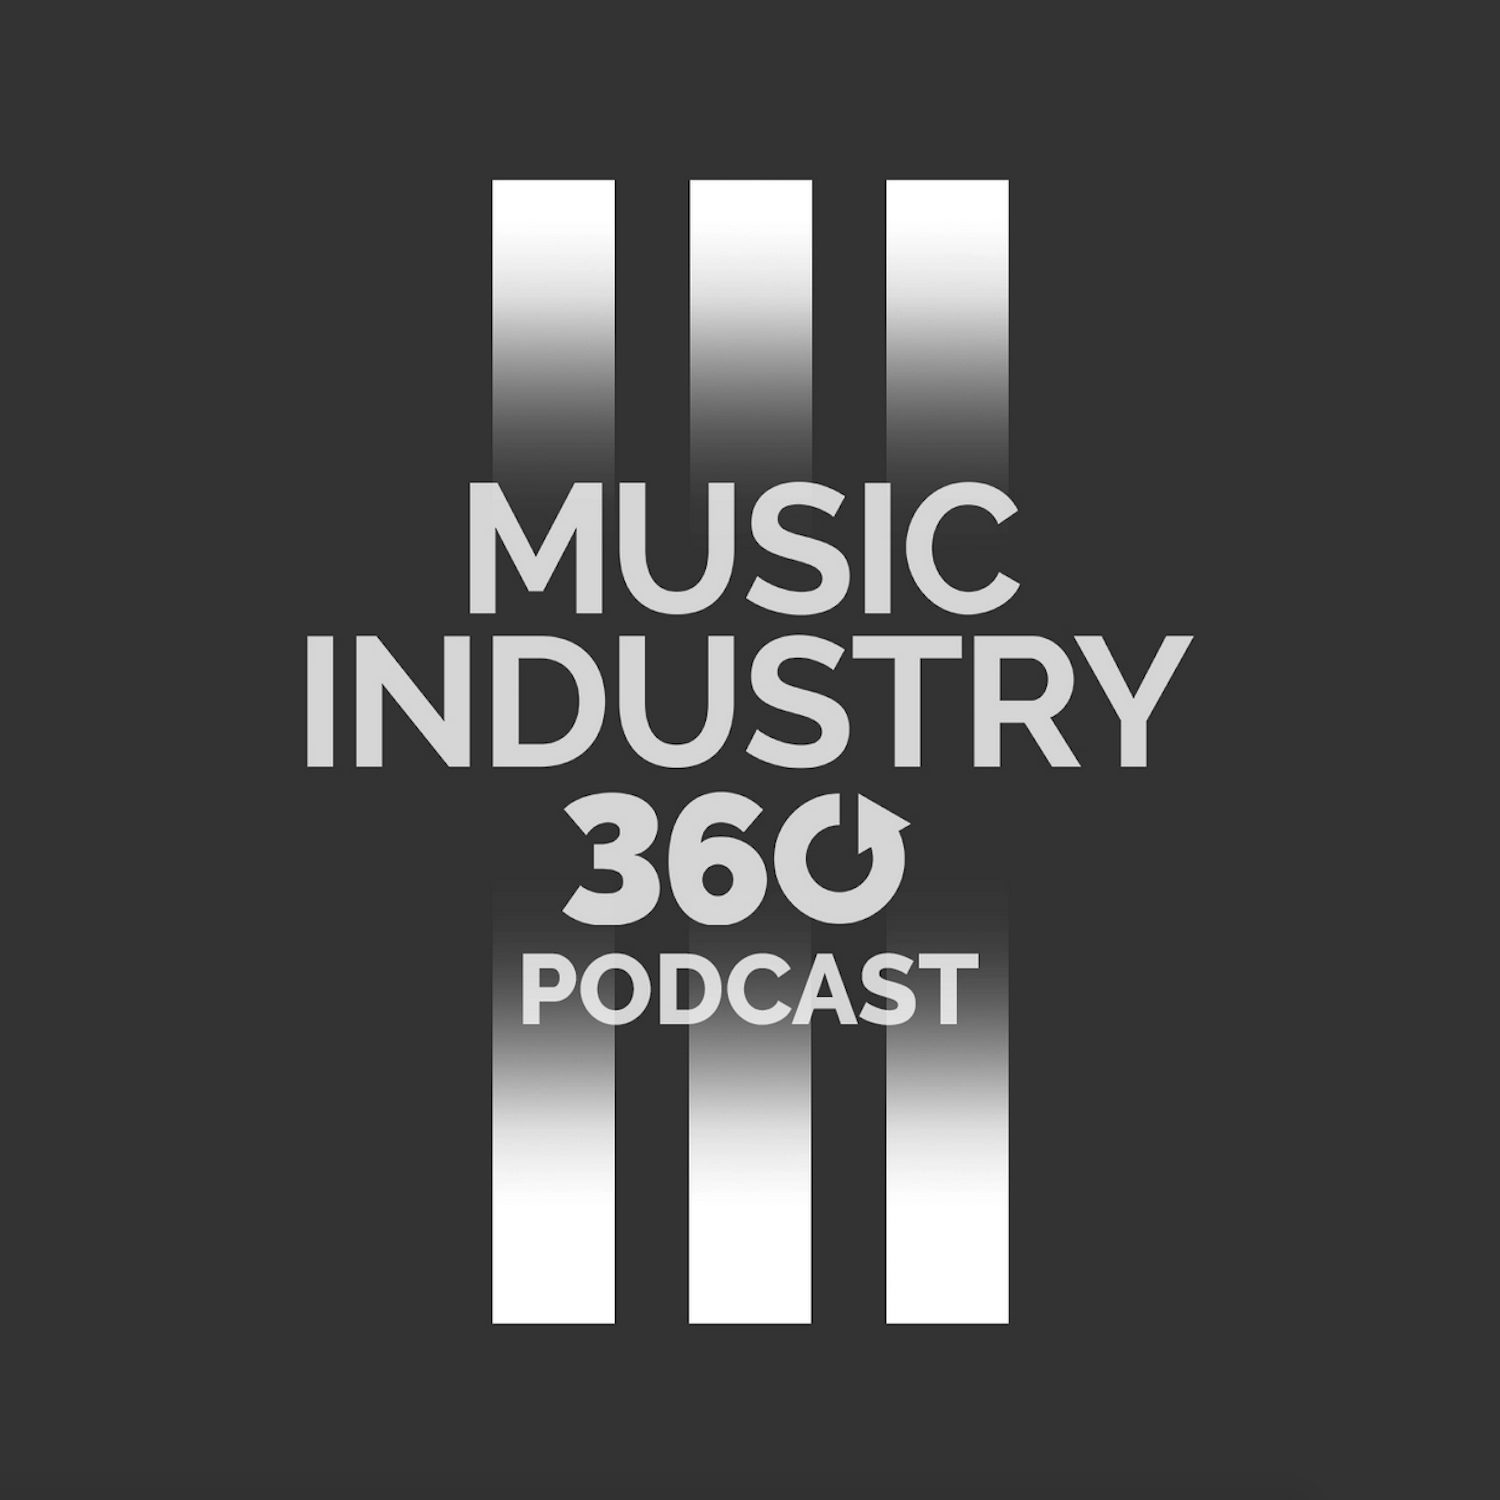 Music Marketing: How to Elevate Your Brand? | Music Industry 360 Podcast